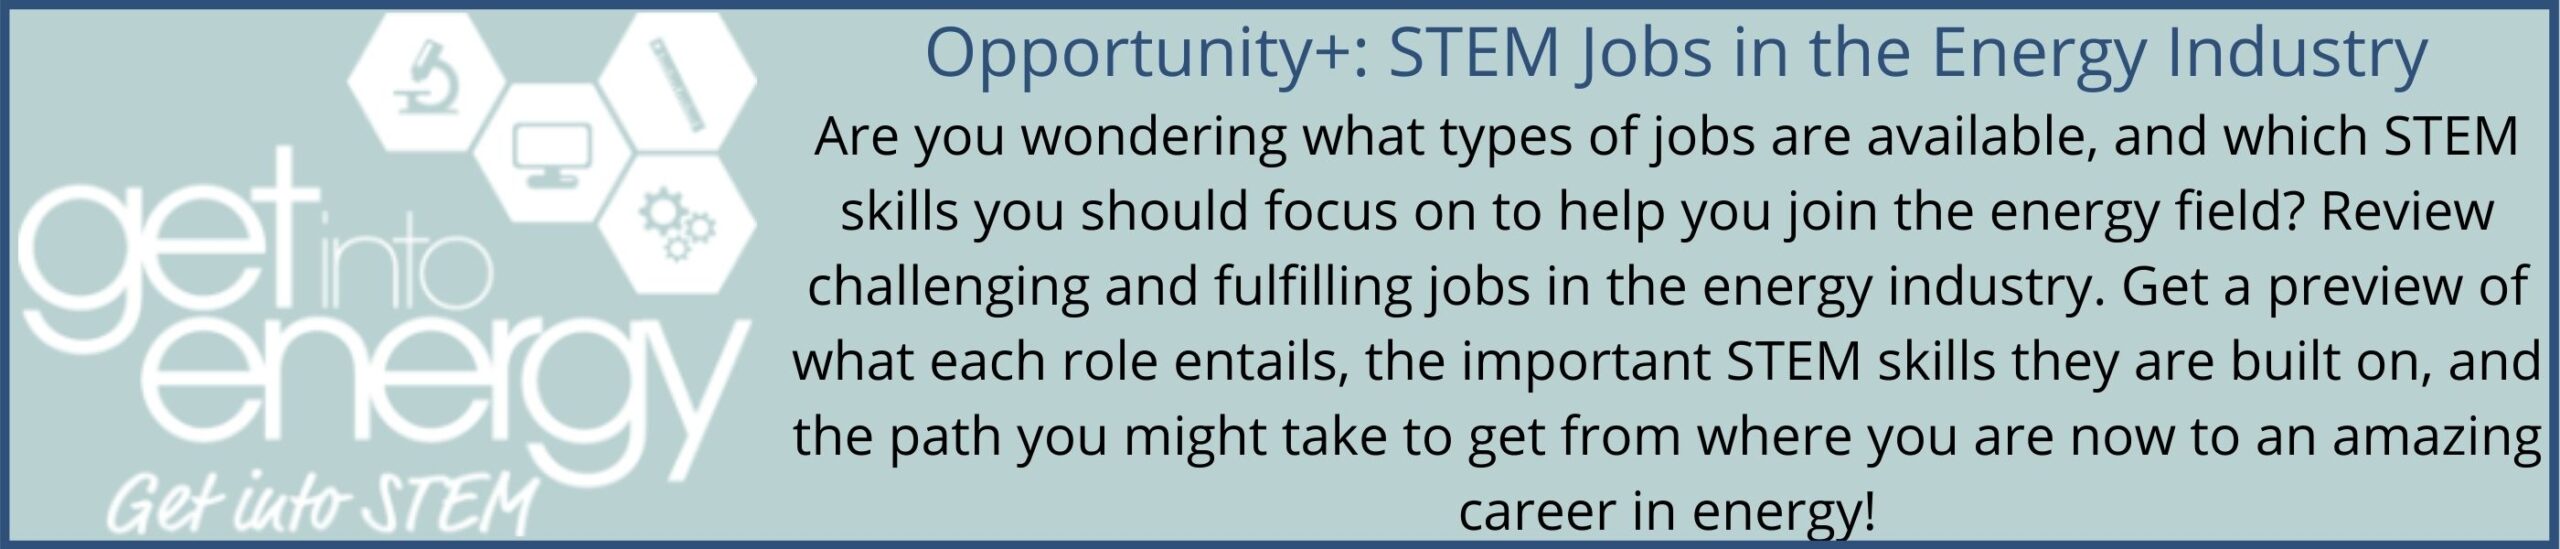 View Opportunity Plus: Get Into Energy - STEM Jobs in the Energy Industry